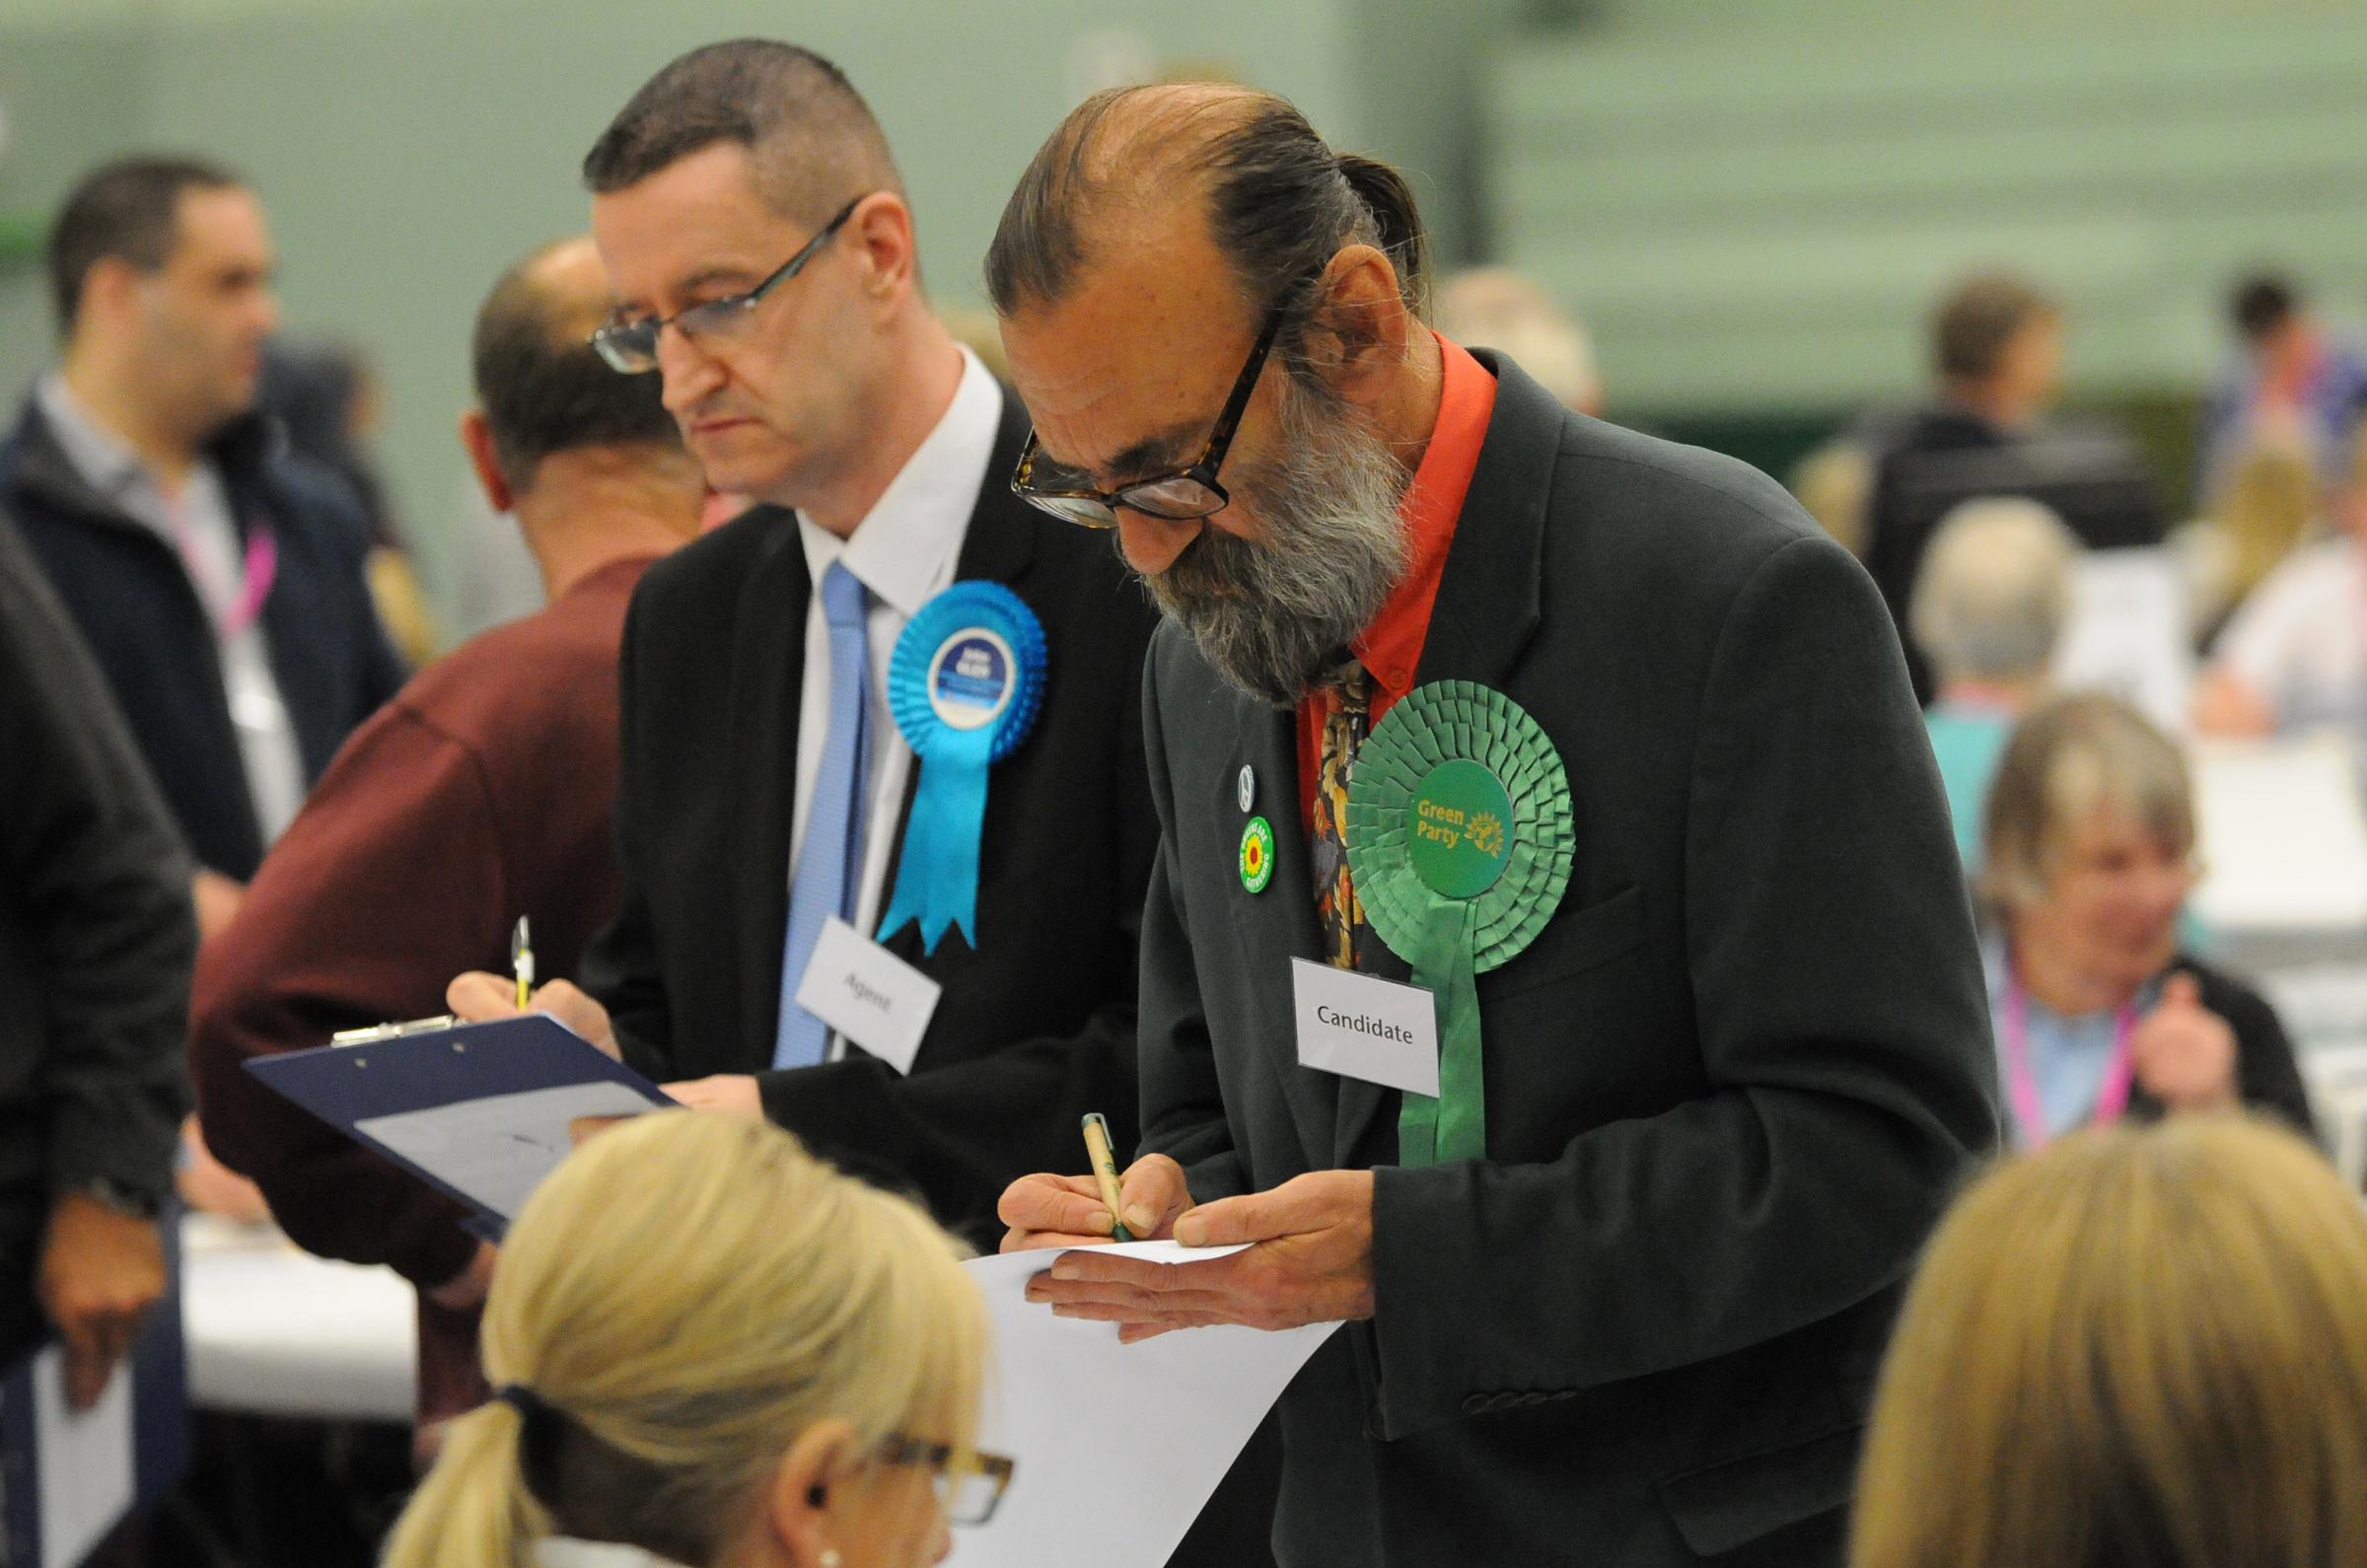 Brig Oubridge..Election count at Five Rivers Health and Wellbeing Centre, Salisbury DC8200P8..Picture by Tom Gregory.